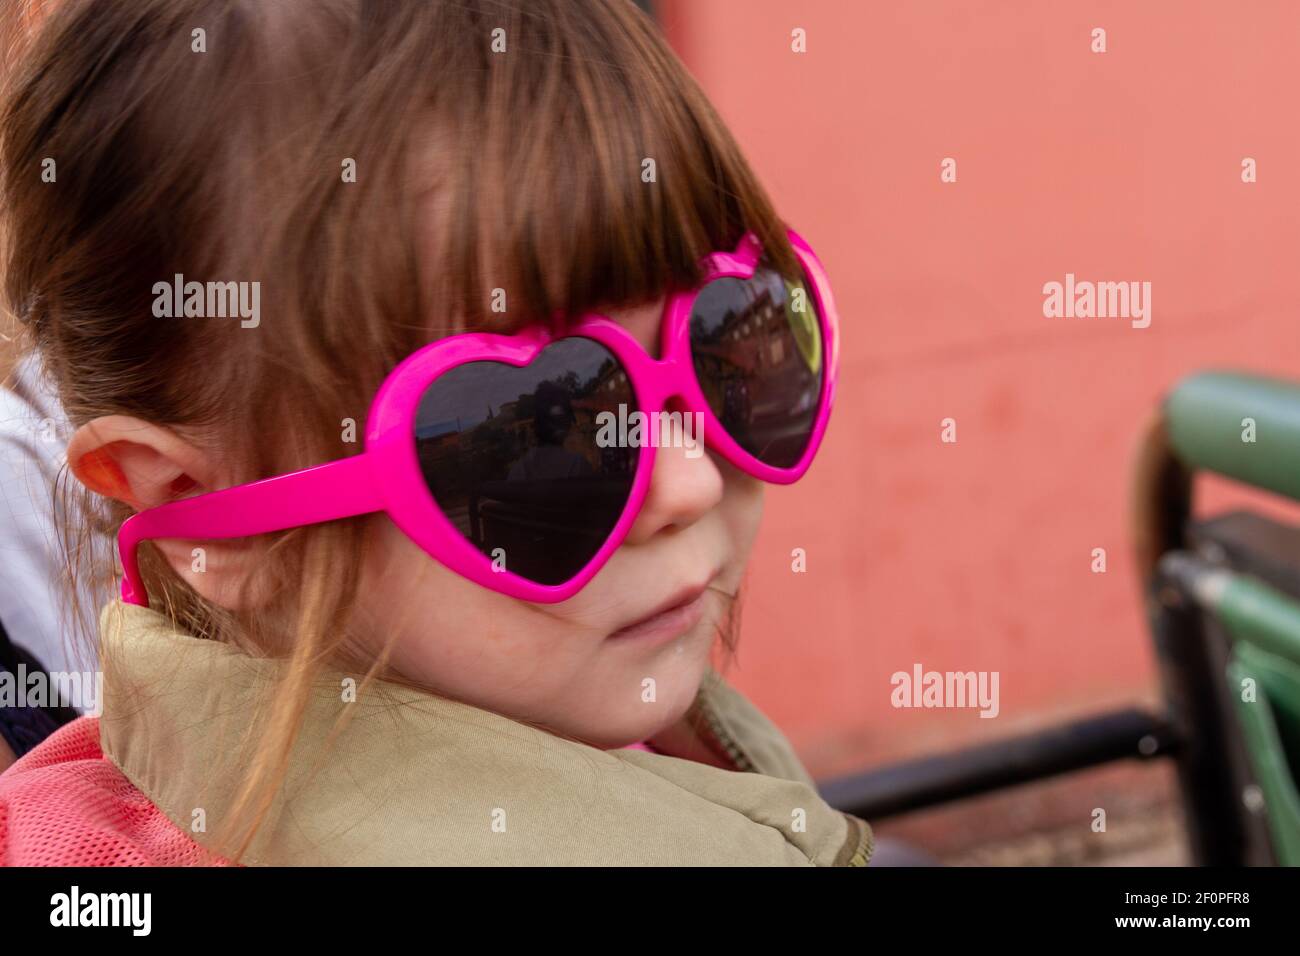 A cute, brown-haired baby girl wearing pink sunglasses and a green jacket Stock Photo